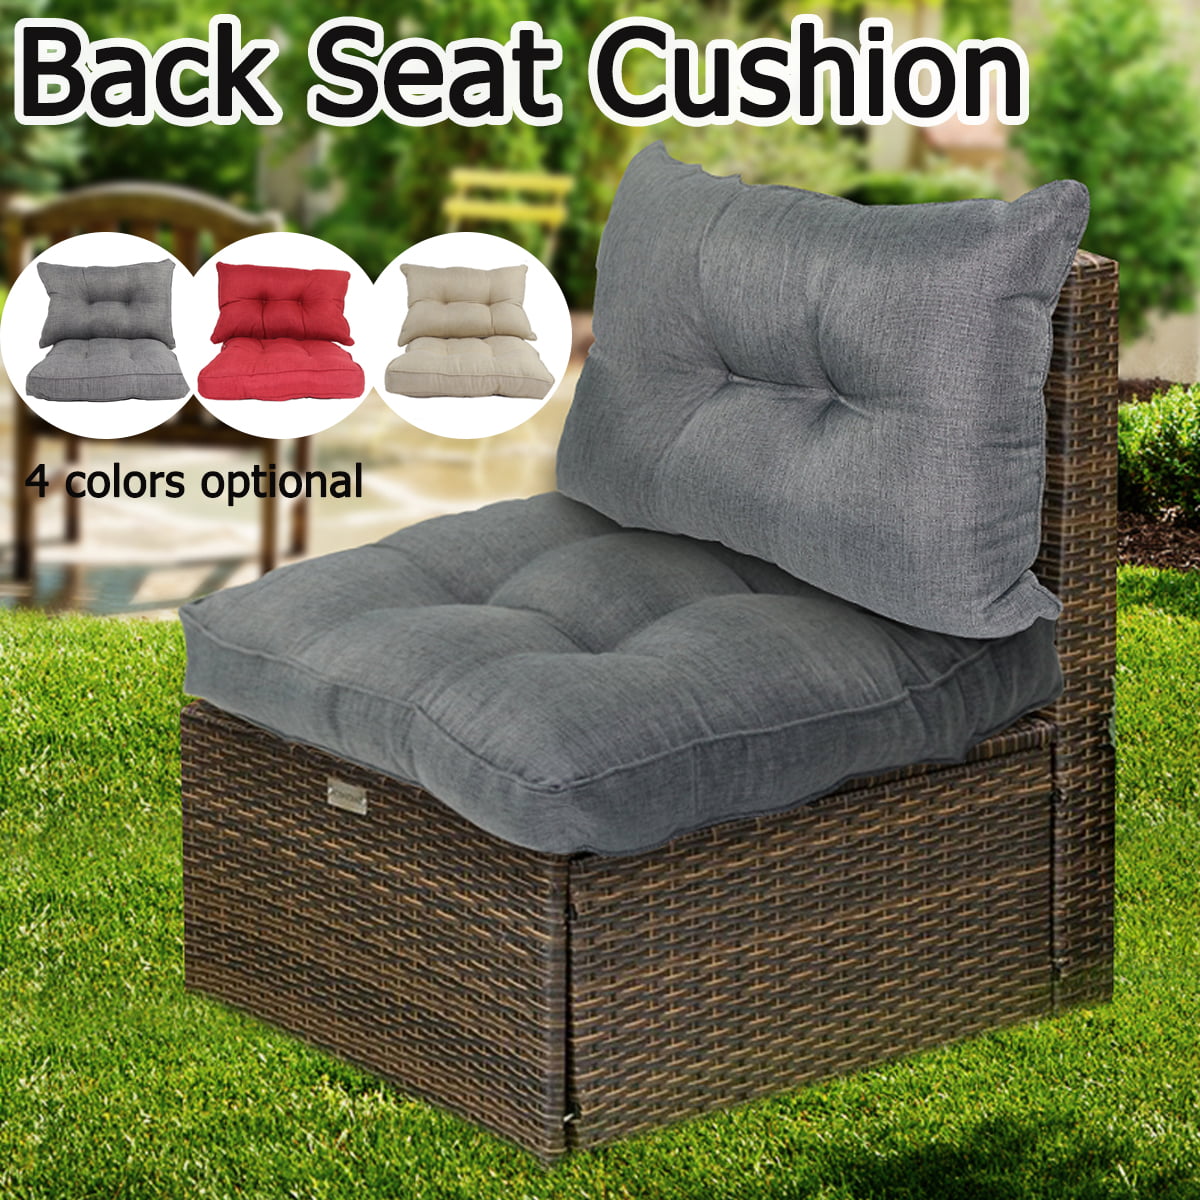 Garden Chair Seat Cushion with Backrest Outdoor Thick Rattan Seat Pads Comfortable Polyester Material Replacement Furniture Rattan Cushions dark grey